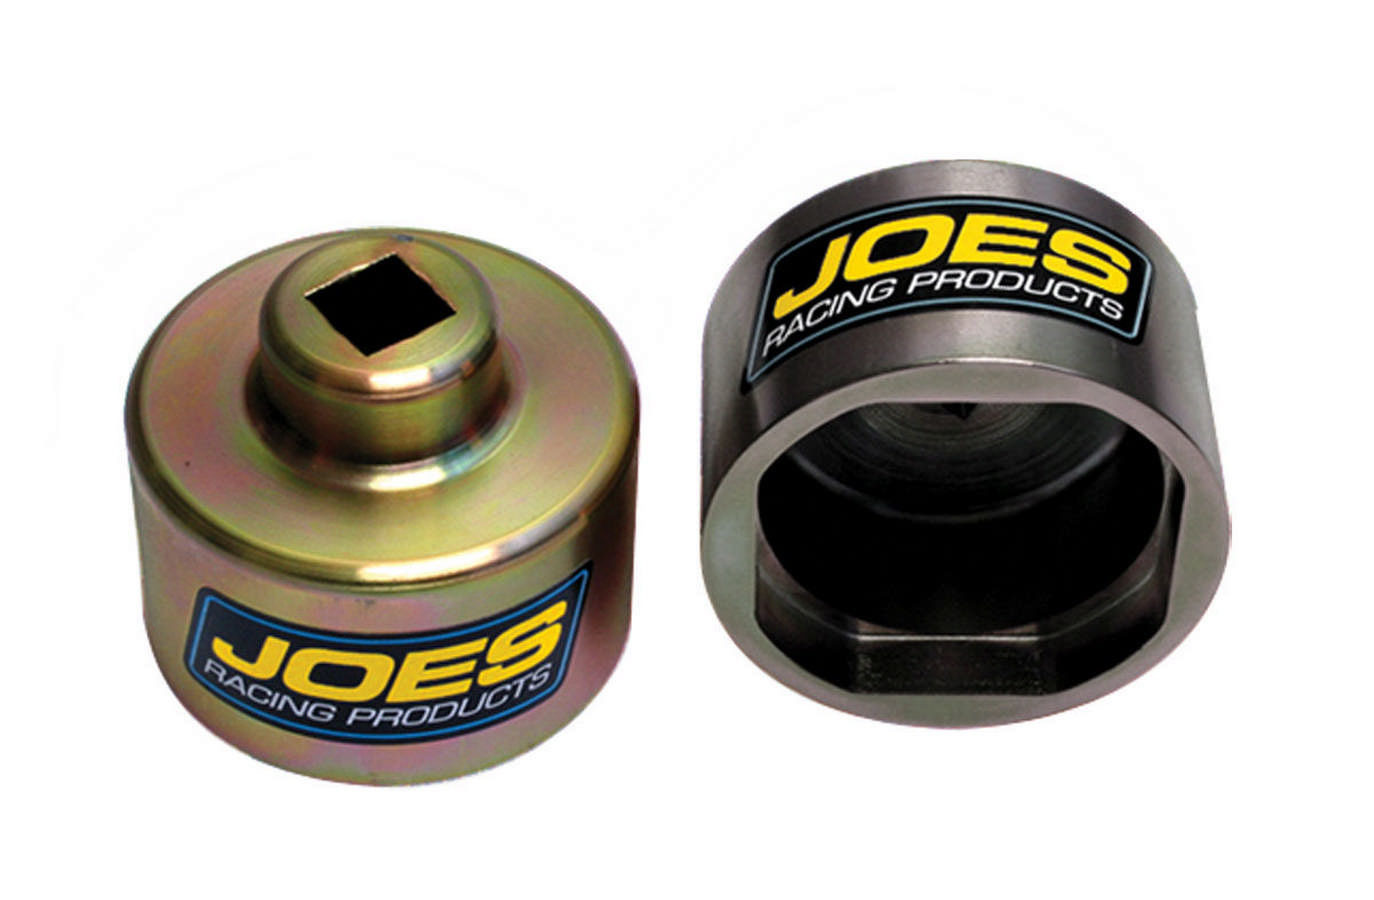 JOES RACING PRODUCTS 32151 Tire Tape Measure 6pk 1/4in Wide